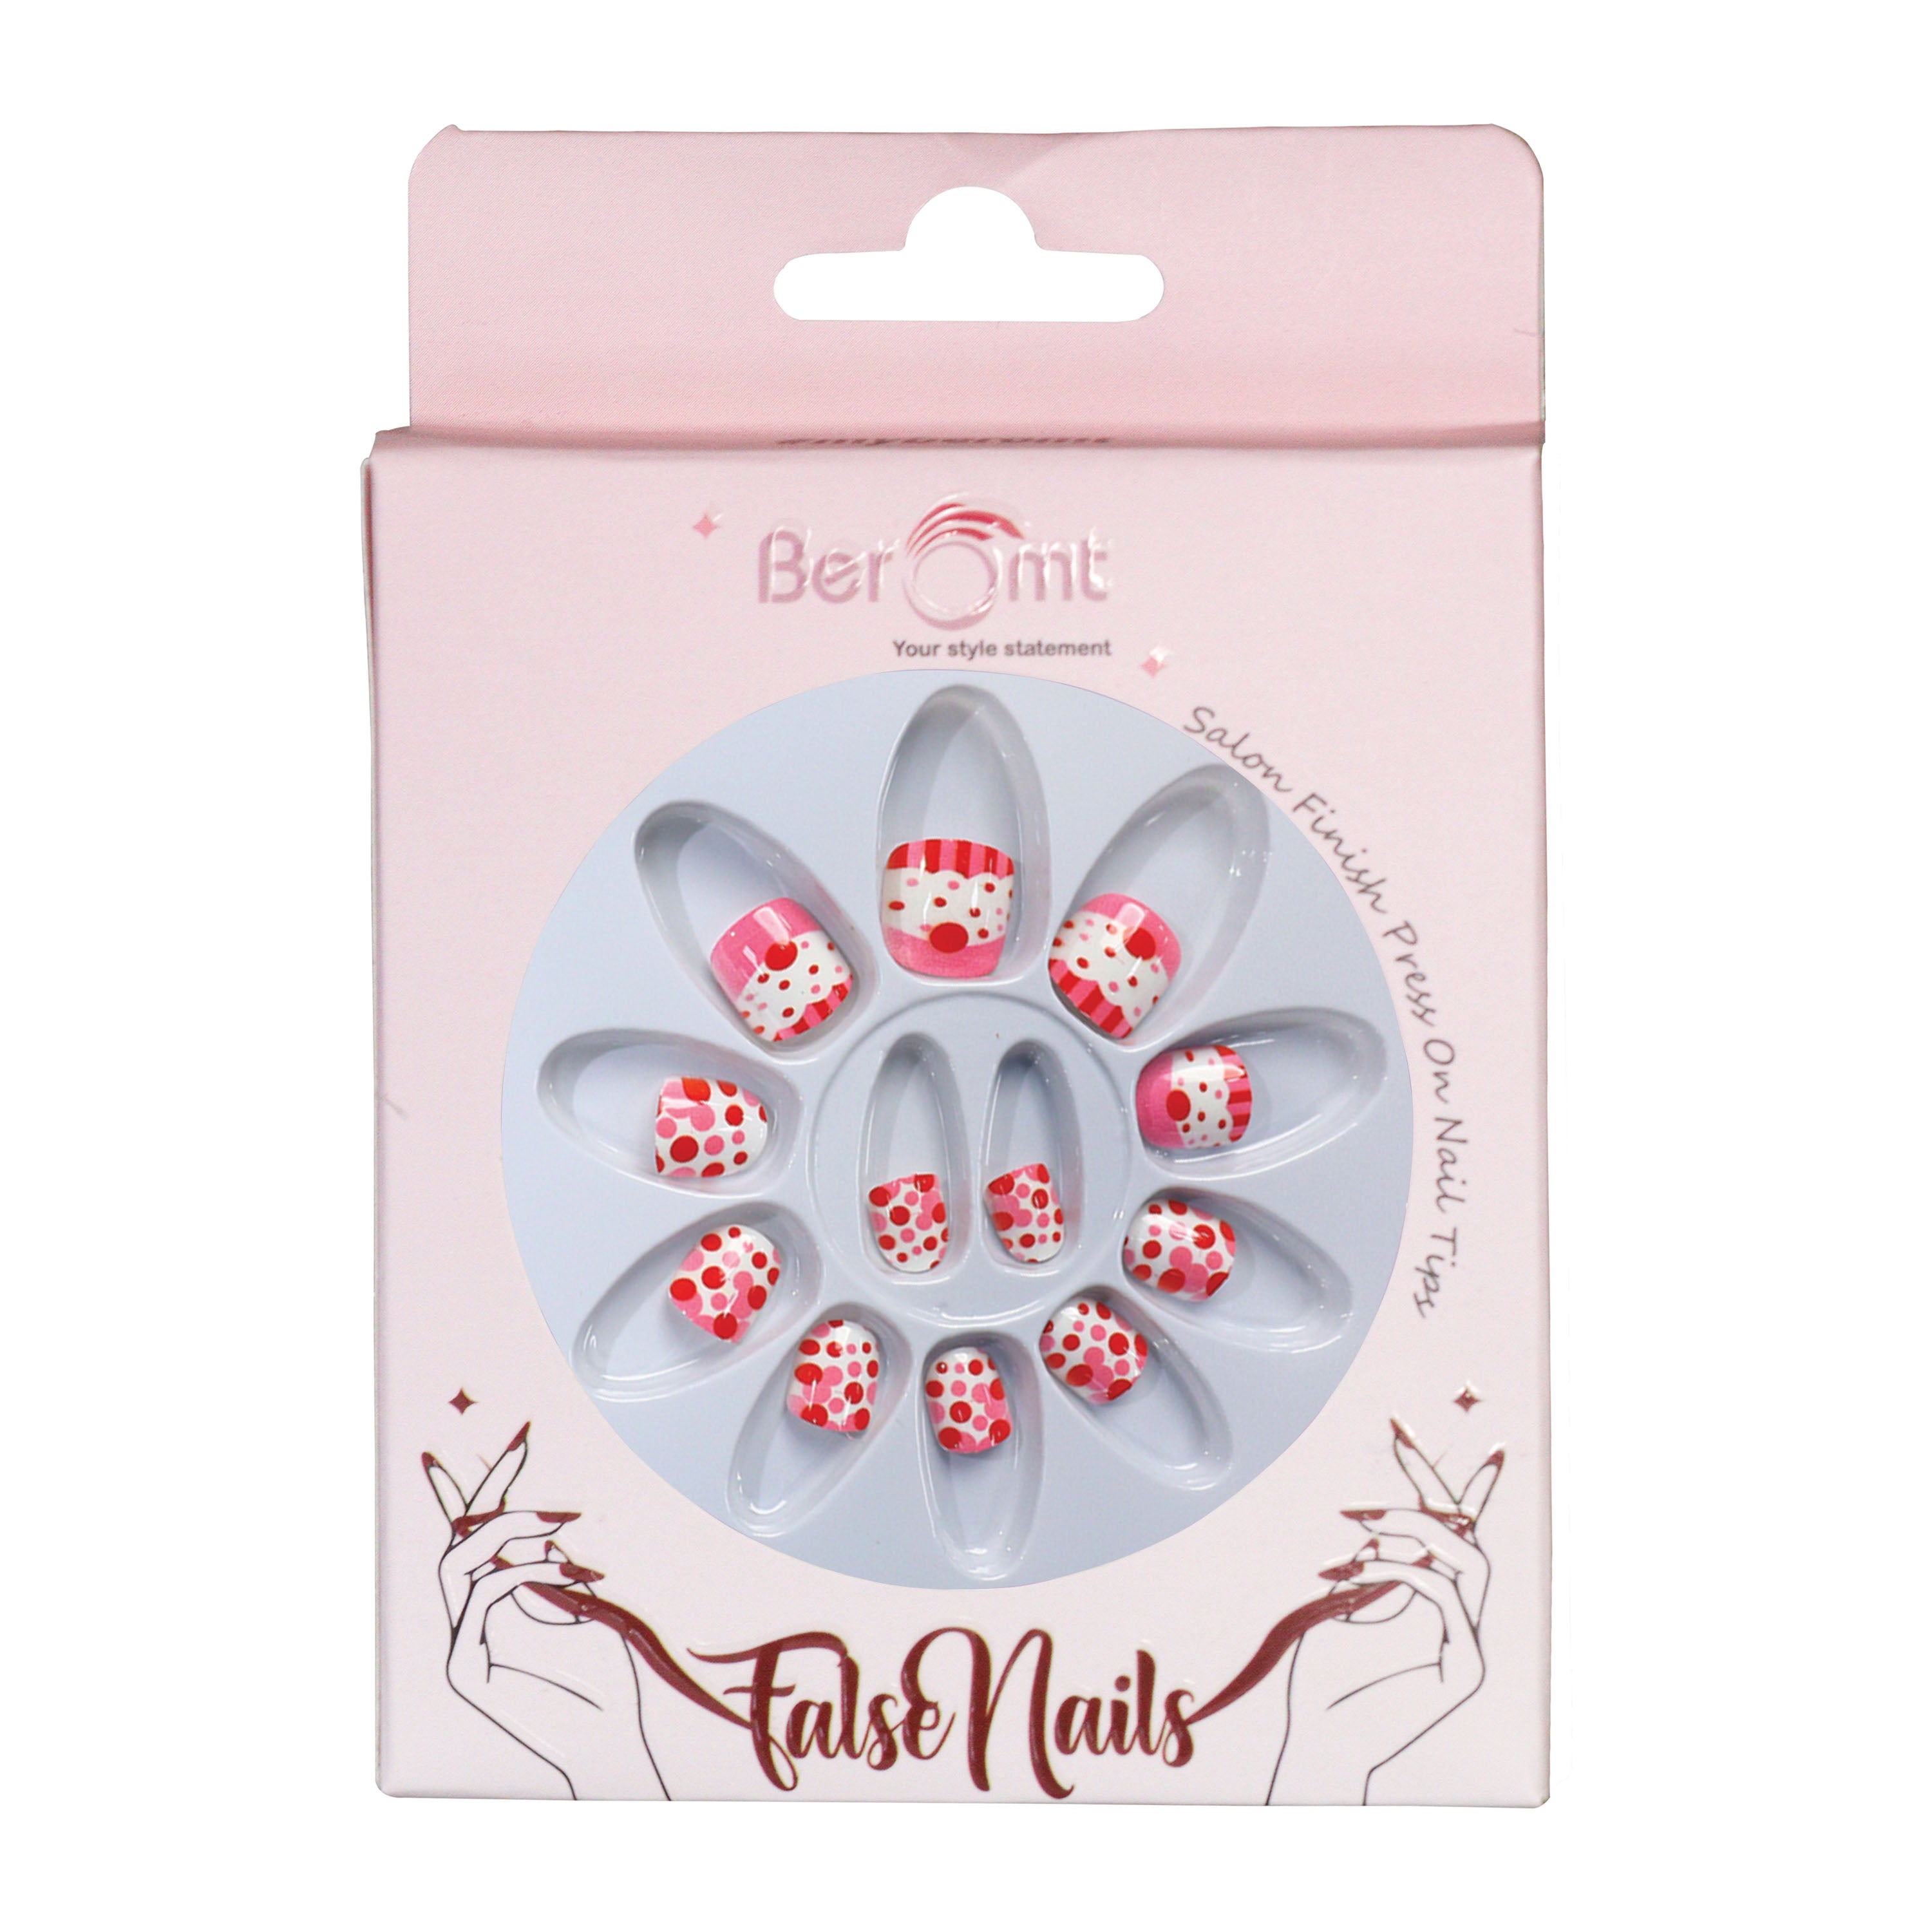 KIDS NAILS - 46 (NAIL KIT INCLUDED)